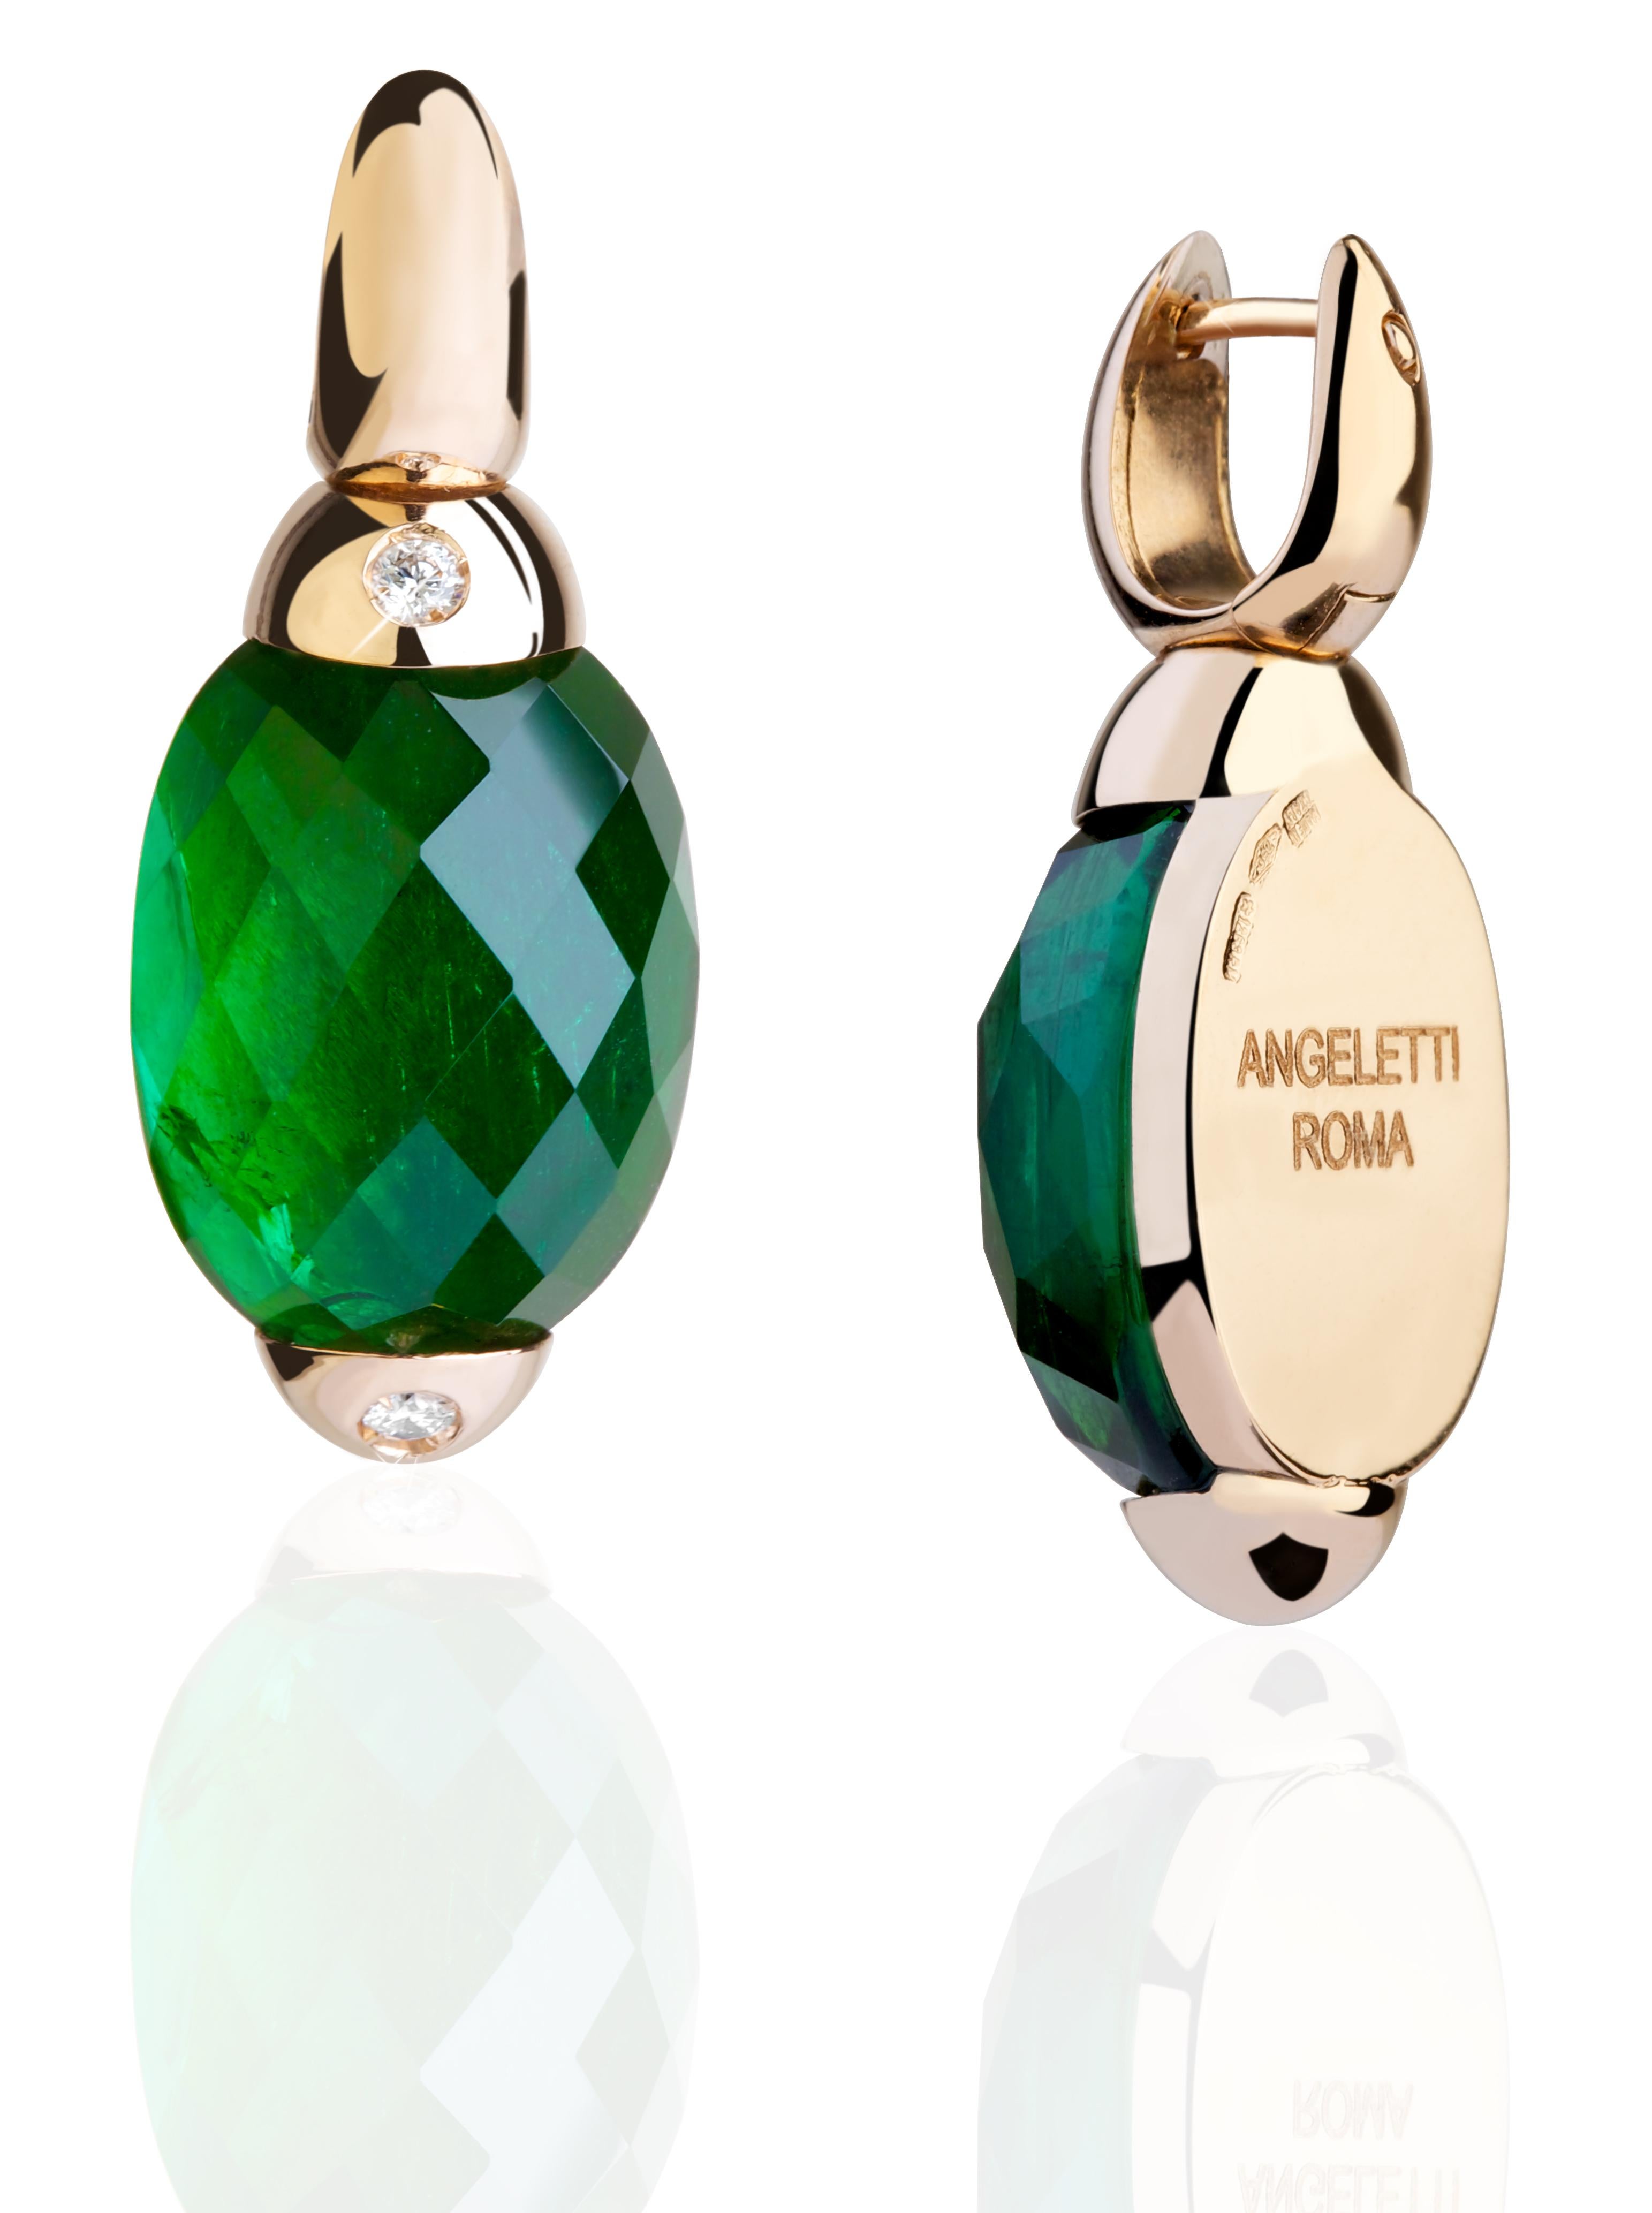 Angeletti Embrace Classic with Green Tourmaline, Diamonds Gold Hoop Earrings
The Embrace Collection is a Masterpiece of Angeletti Jewellery. The First Piece of the Collection was the Ring, which Resulted as a Very Modern Concept Available With